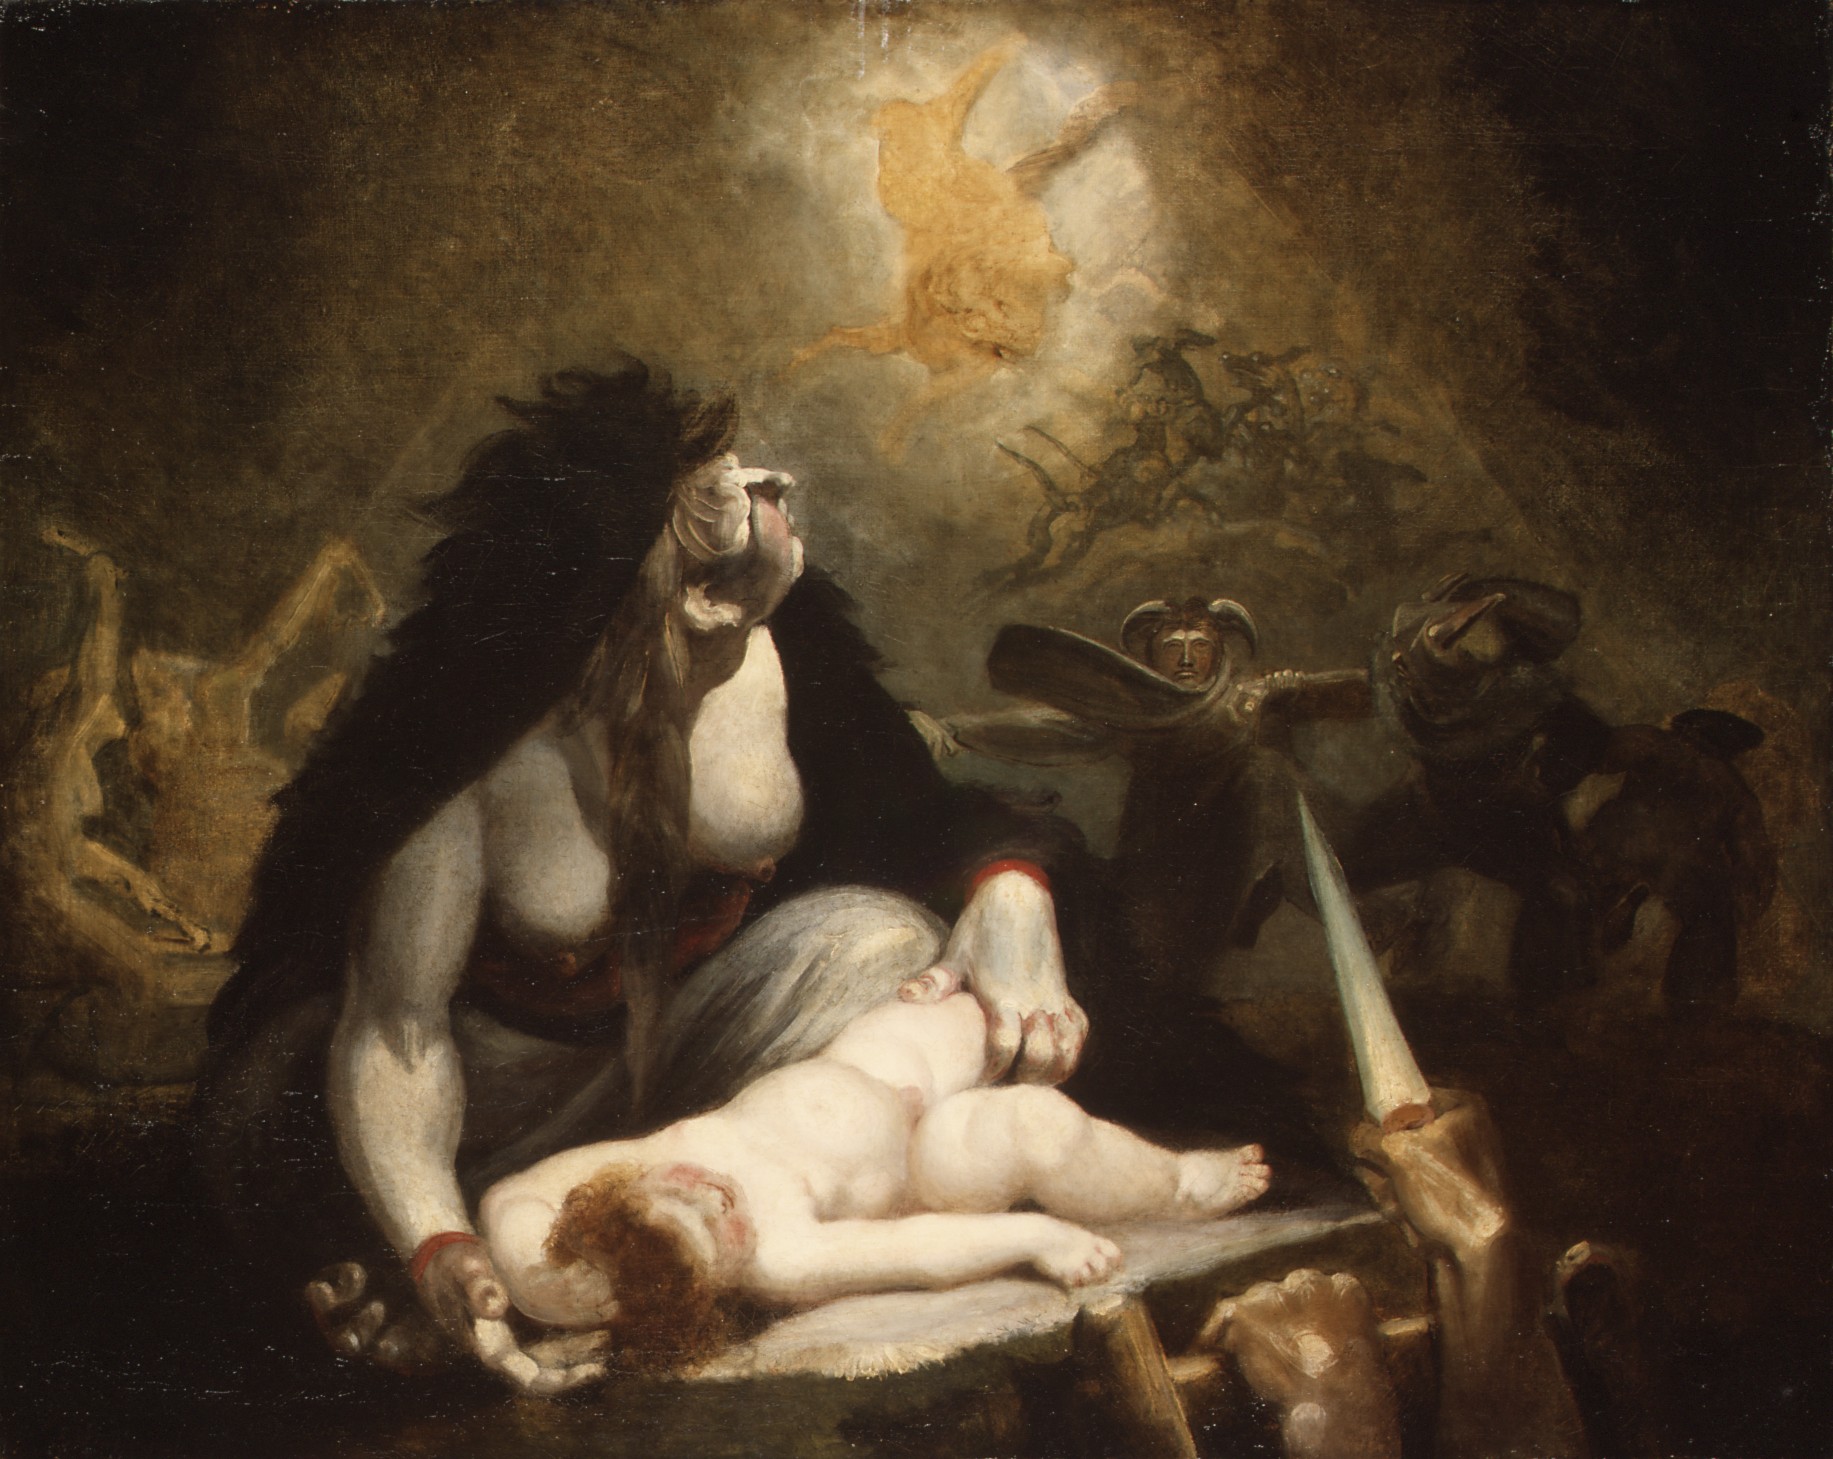 Fuseli Night Hag Lapland Witches 2 for Mothers Witches post